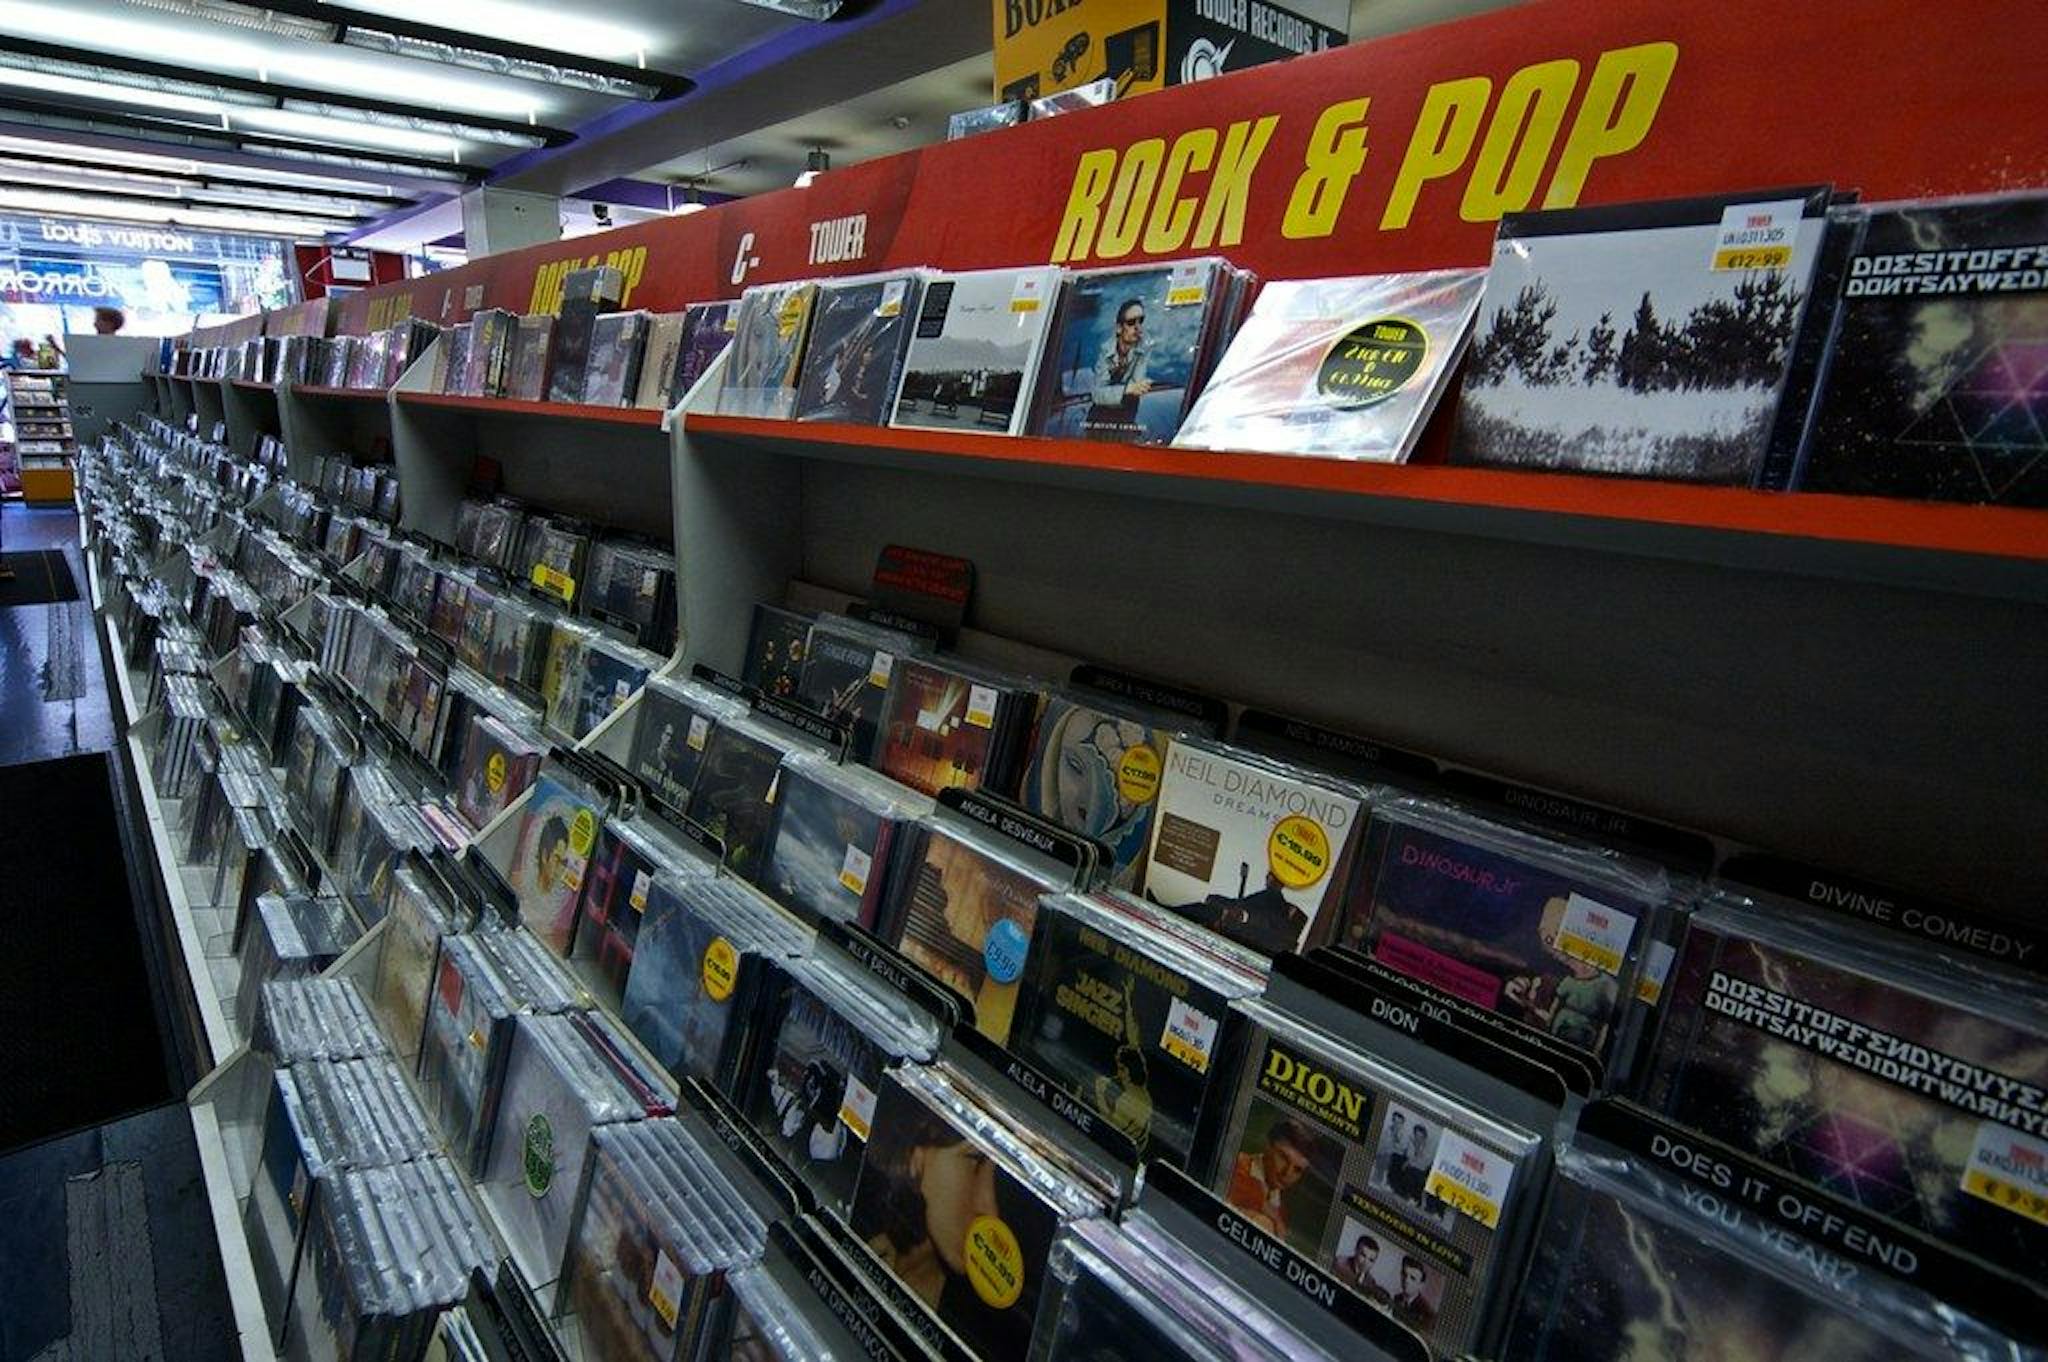 An example of Tower Records where I spent my youth browsing instead of buying